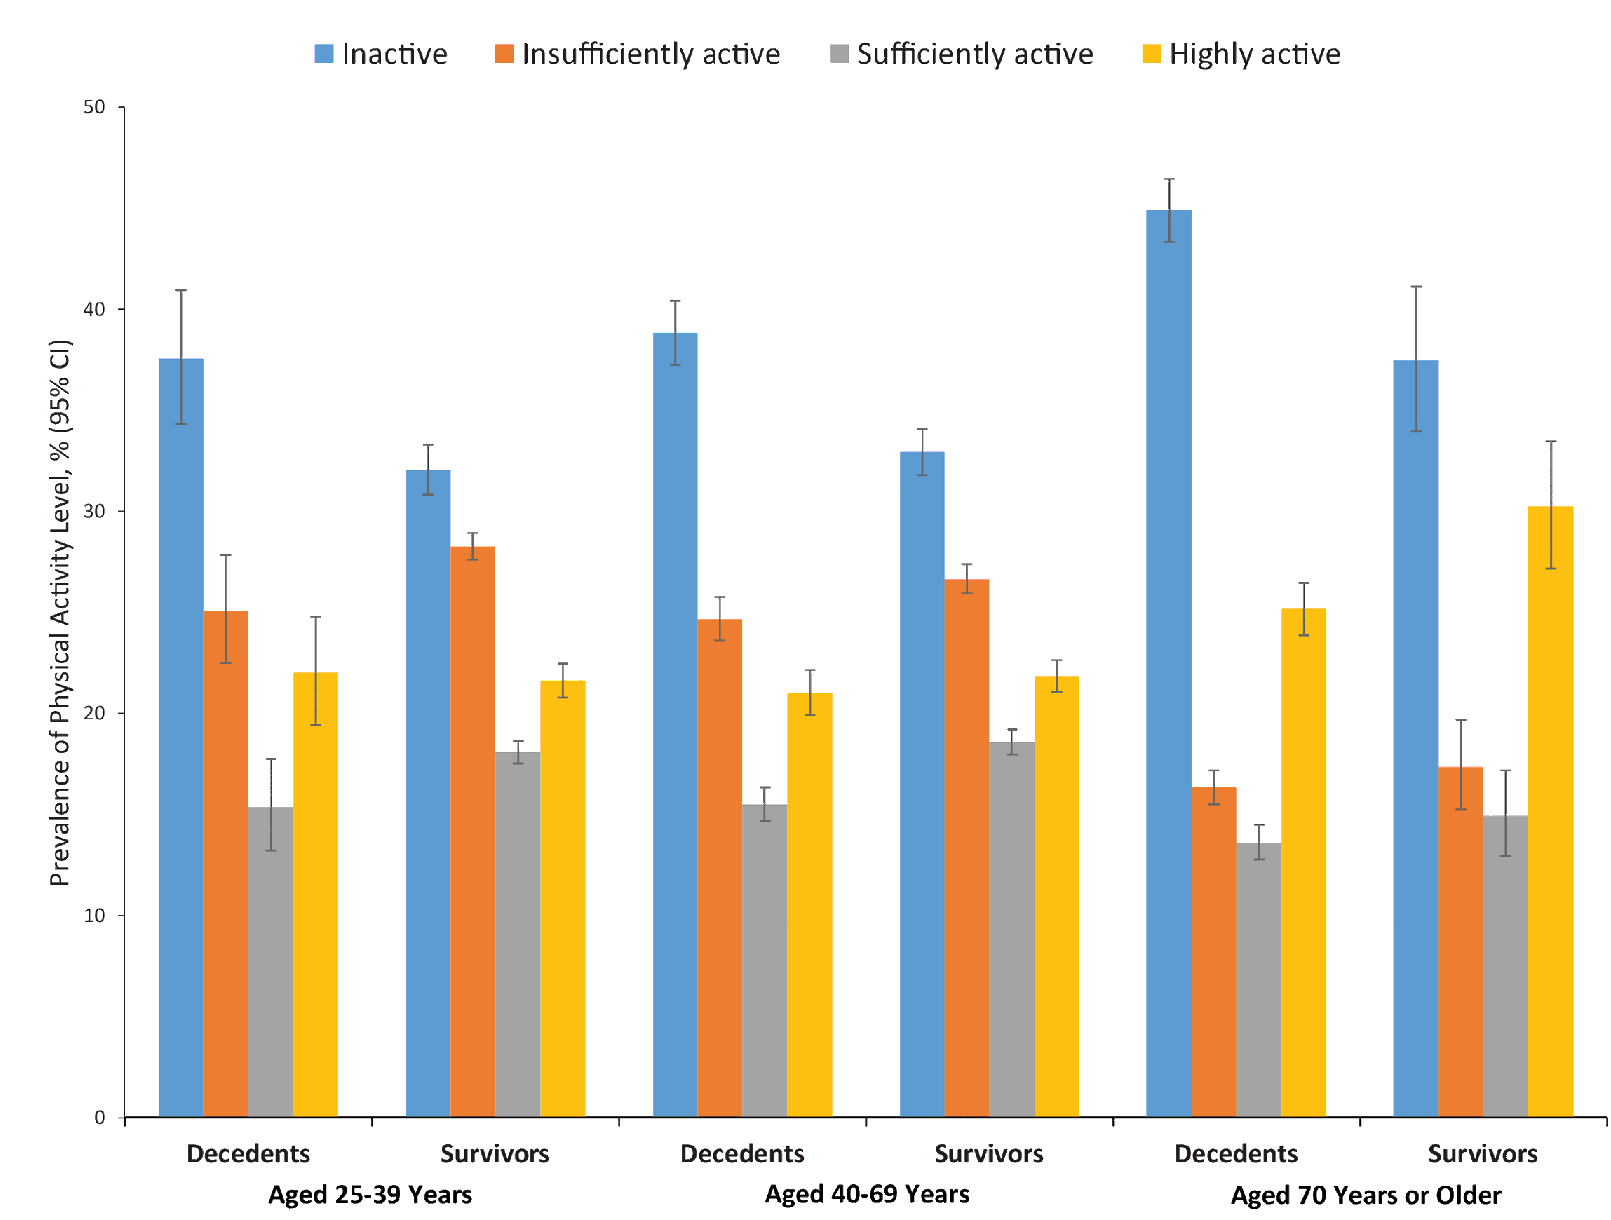  Prevalence of physical activity among decedents and survivors aged 25 years or older (N = 67,762), by age group, National Health Interview Survey Linked Mortality Files, 1990–1991. Adults who were excluded from the sample were those 1) categorized as physically disabled or whose disability status was unknown; 2) missing mortality or time scale data; missing data on physical activity, covariates, or both; and who died the same quarter of the year as interviewed. Individuals were categorized into 4 activity levels: inactive (no physical activity reported in the past 2 weeks), insufficiently active (some activity but 300 min/wk of moderate-intensity equivalent activity). Abbreviation: CI, confidence interval.